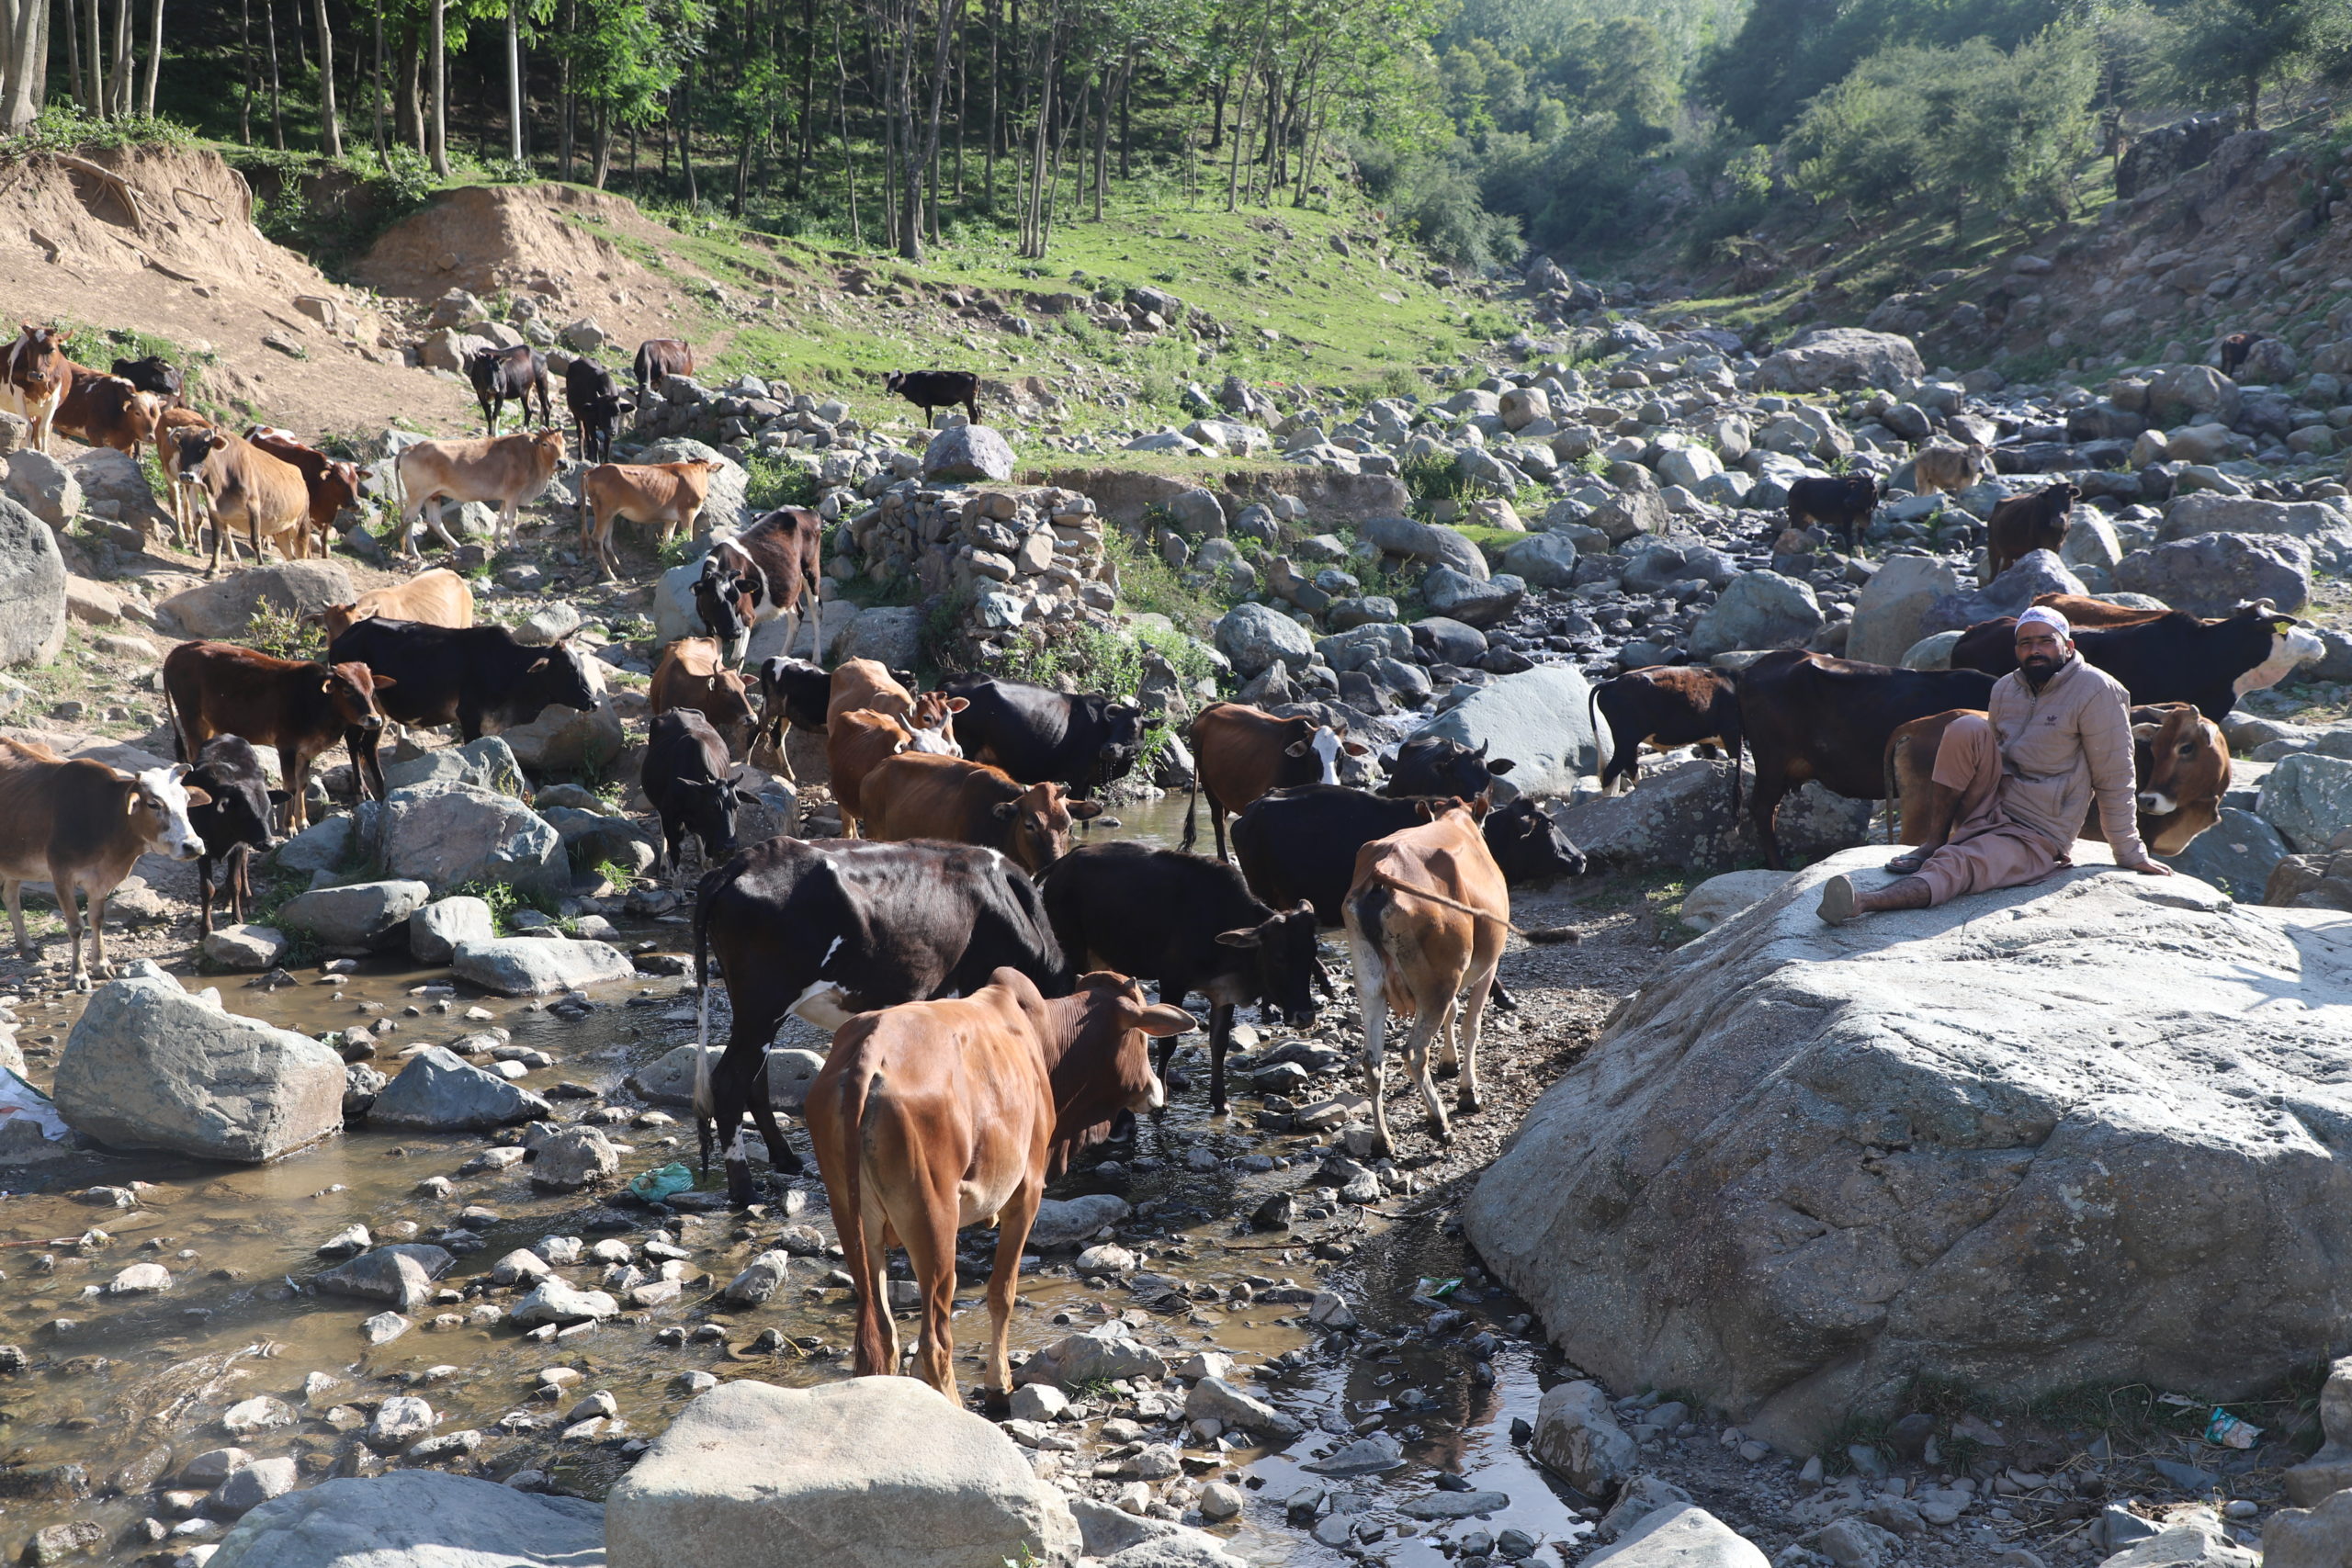 cattle in rocky stream looked over by man sitting on large rock